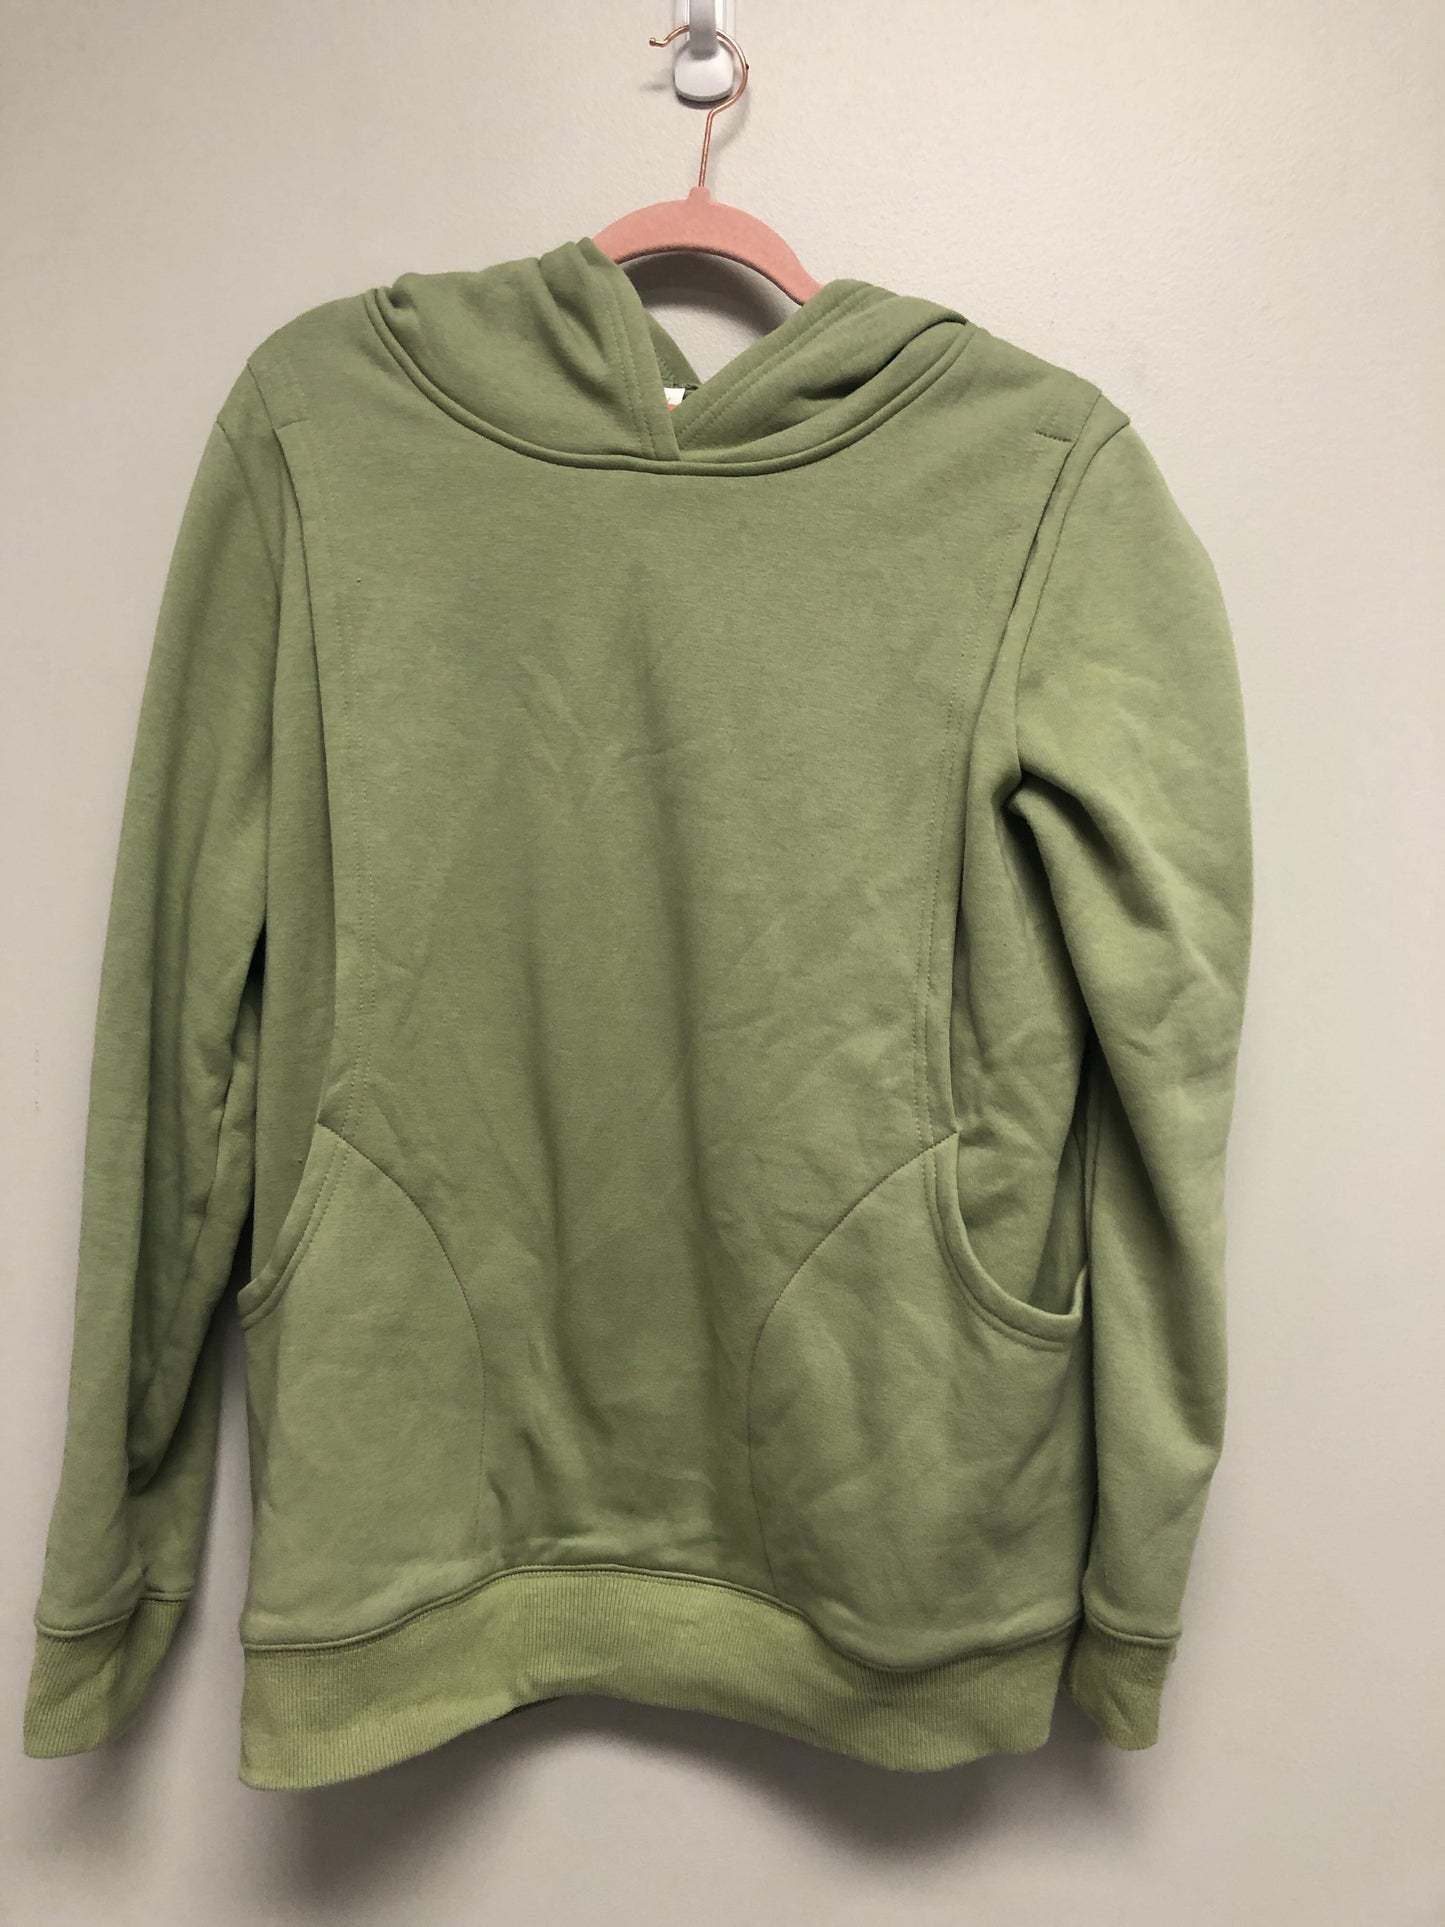 Outlet 6310 - The Latched Mama Heavy Hoodie - Fern - 1X